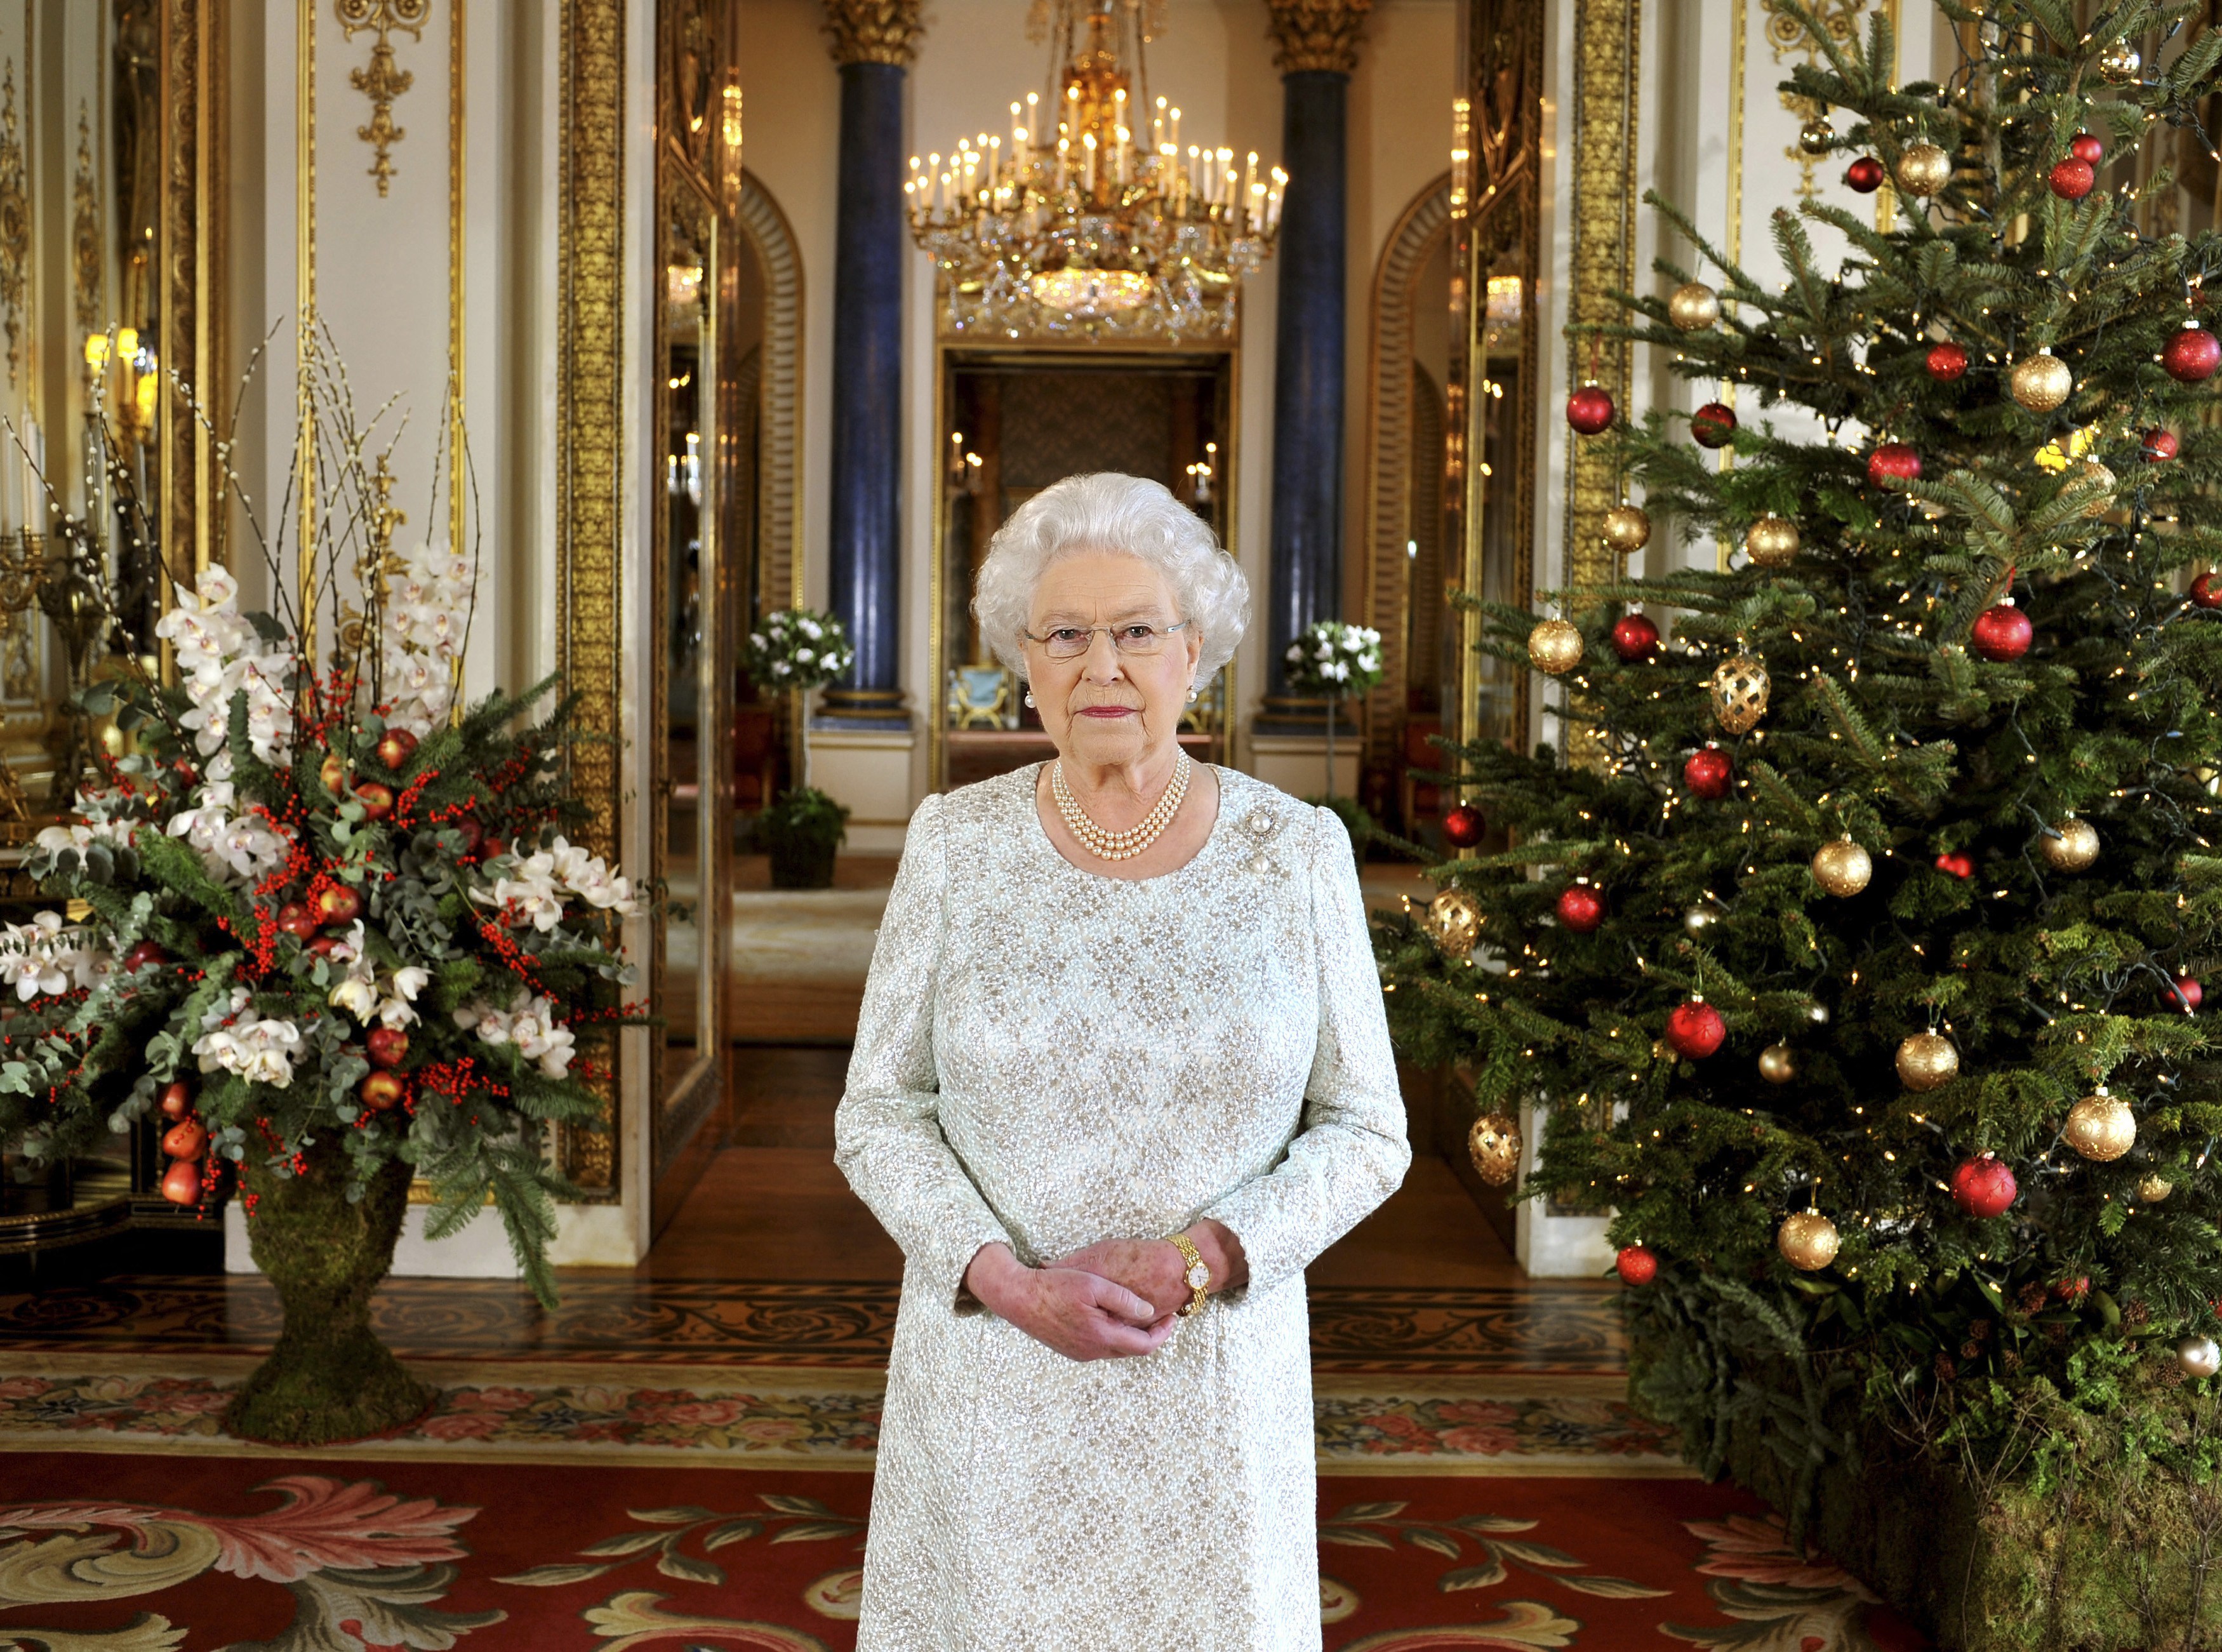 Who Was At Queens Christmas Lunch In 2022 Queen Elizabeth Cancels Pre-Christmas Lunch As Covid Cases Soar | Reuters